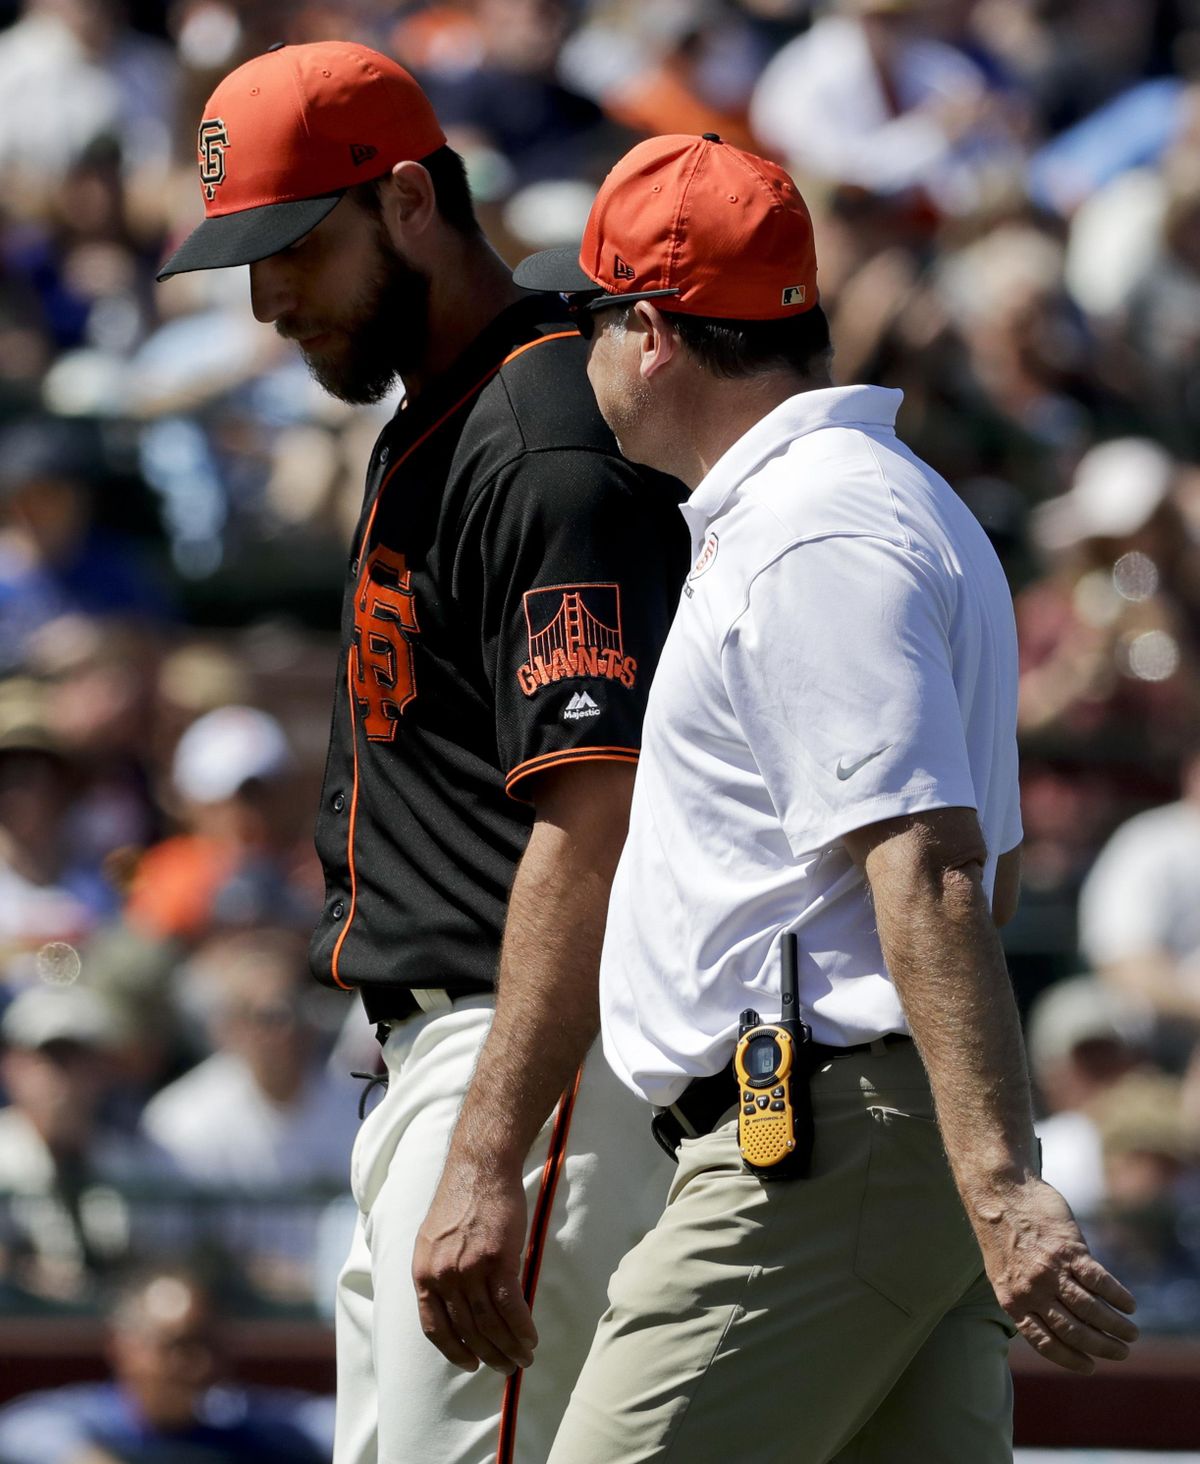 San Francisco Giants starting pitcher Madison Bumgarner is helped off the field after getting hit by a batted ball during the third inning of the team’s spring training baseball game against the Kansas City Royals in Scottsdale, Ariz., Friday, March 23, 2018. (Chris Carlson / Associated Press)